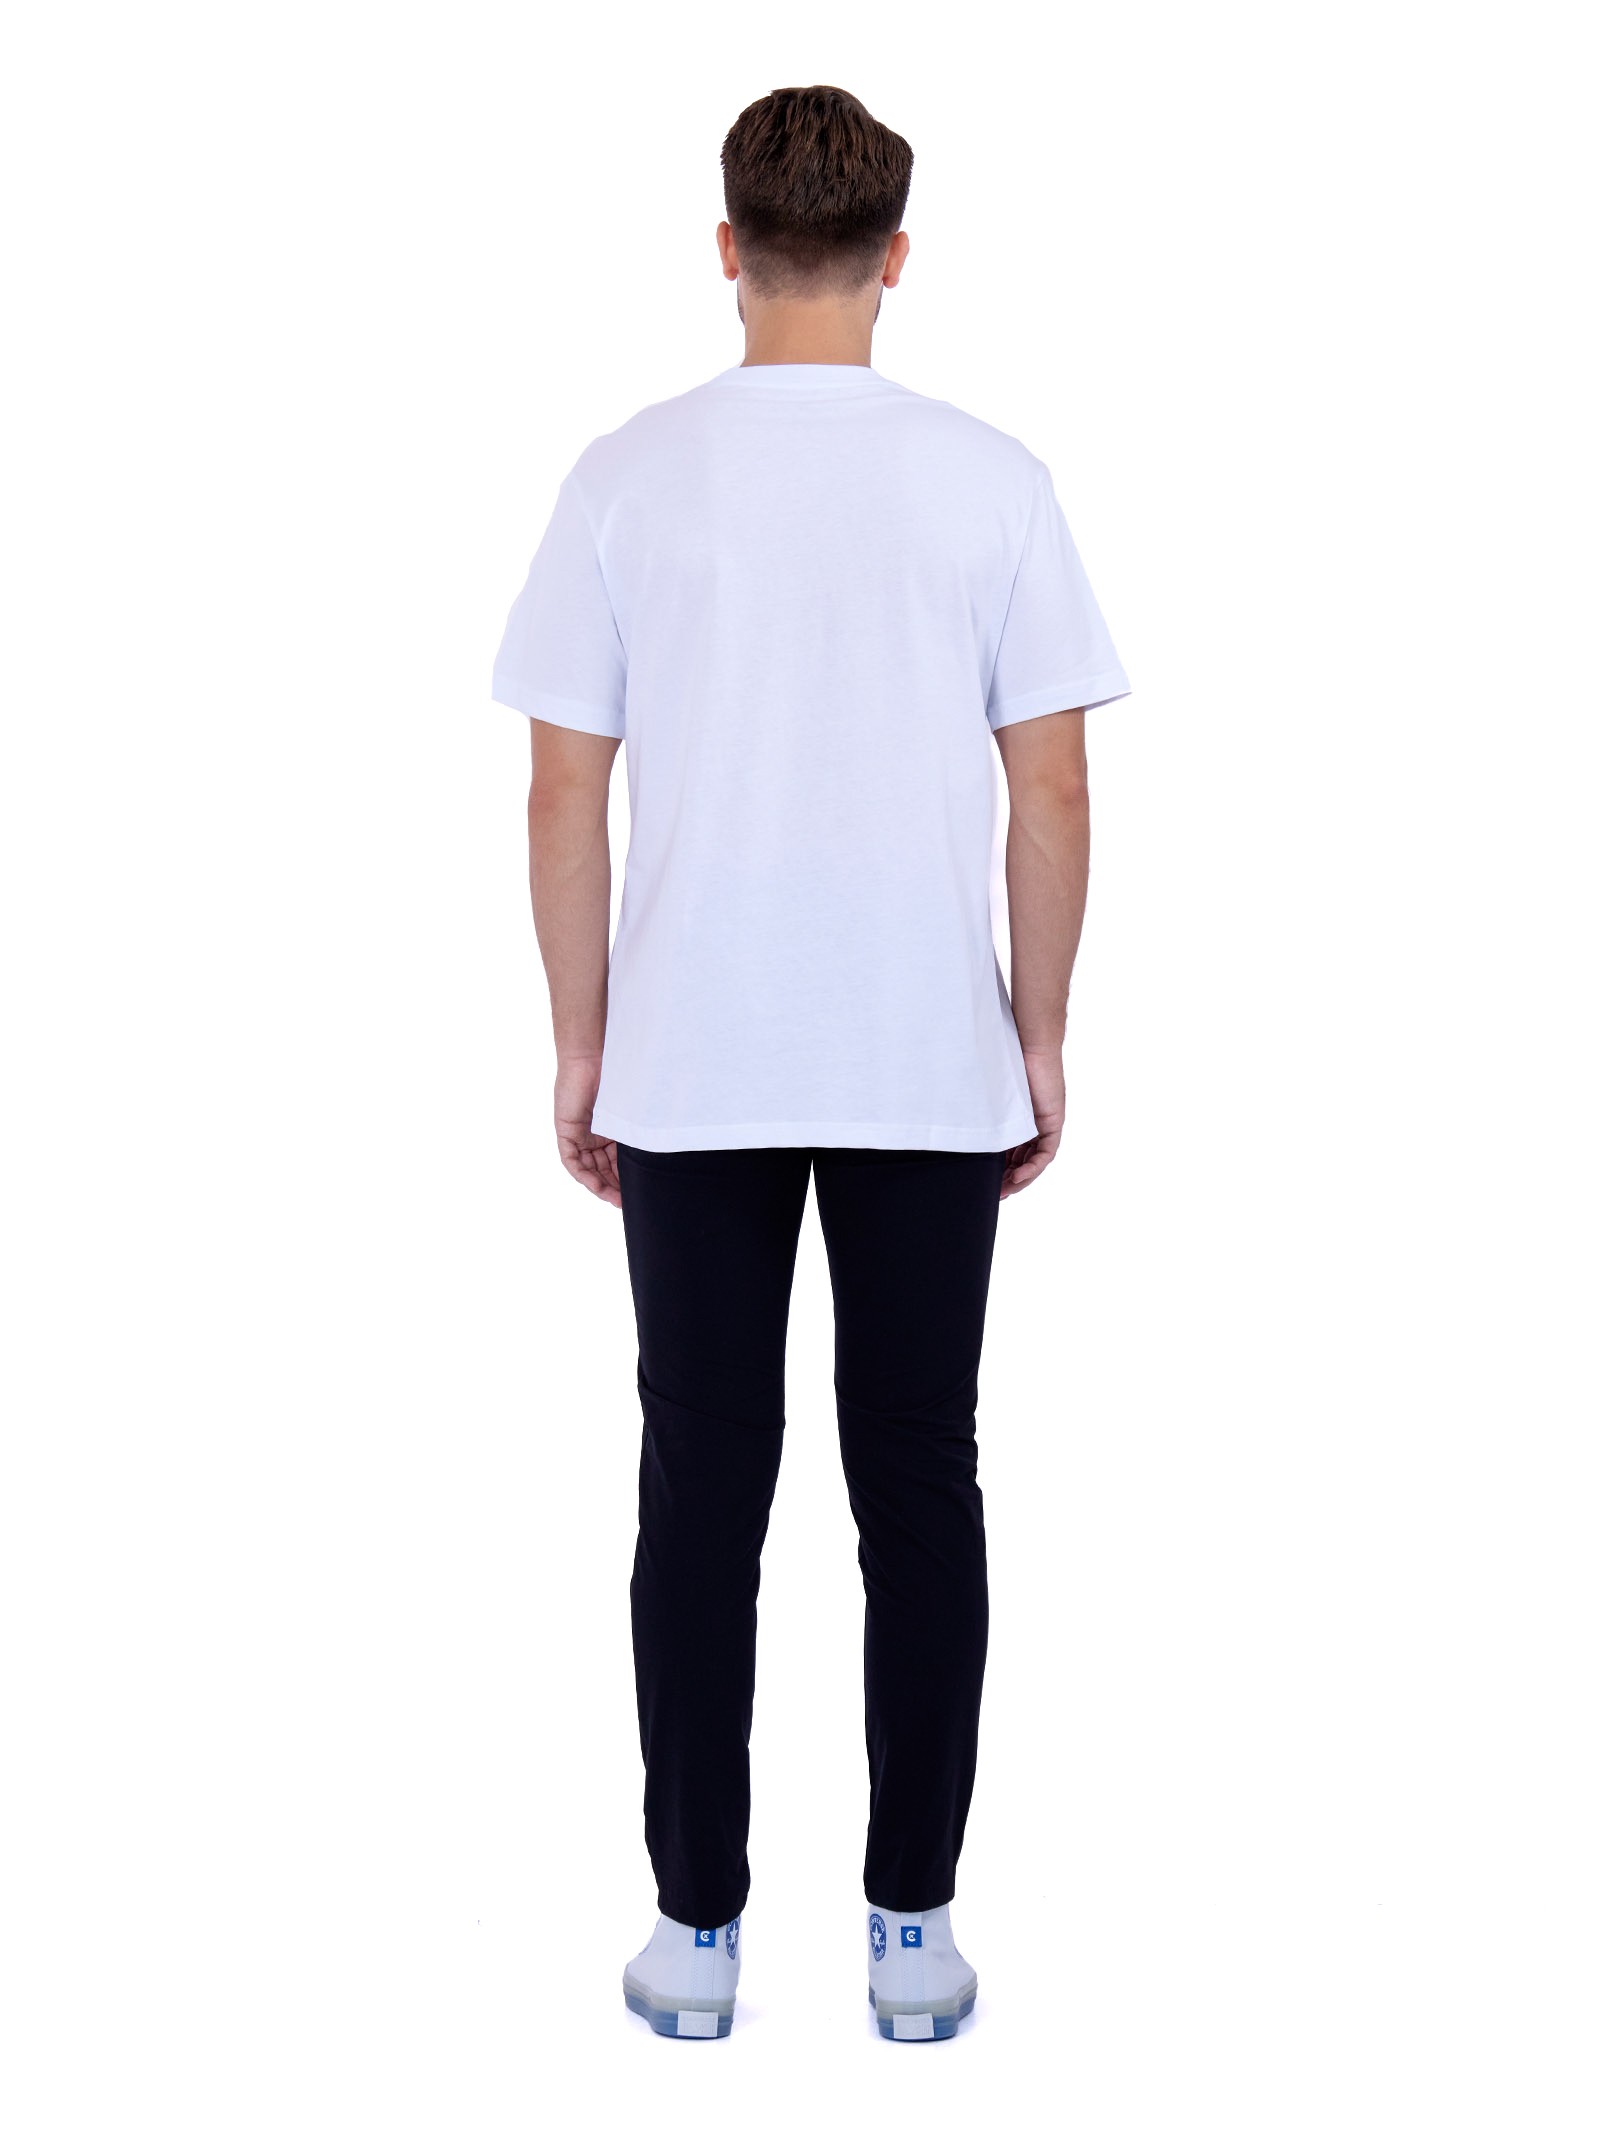 White Supreme T-Shirt with quote